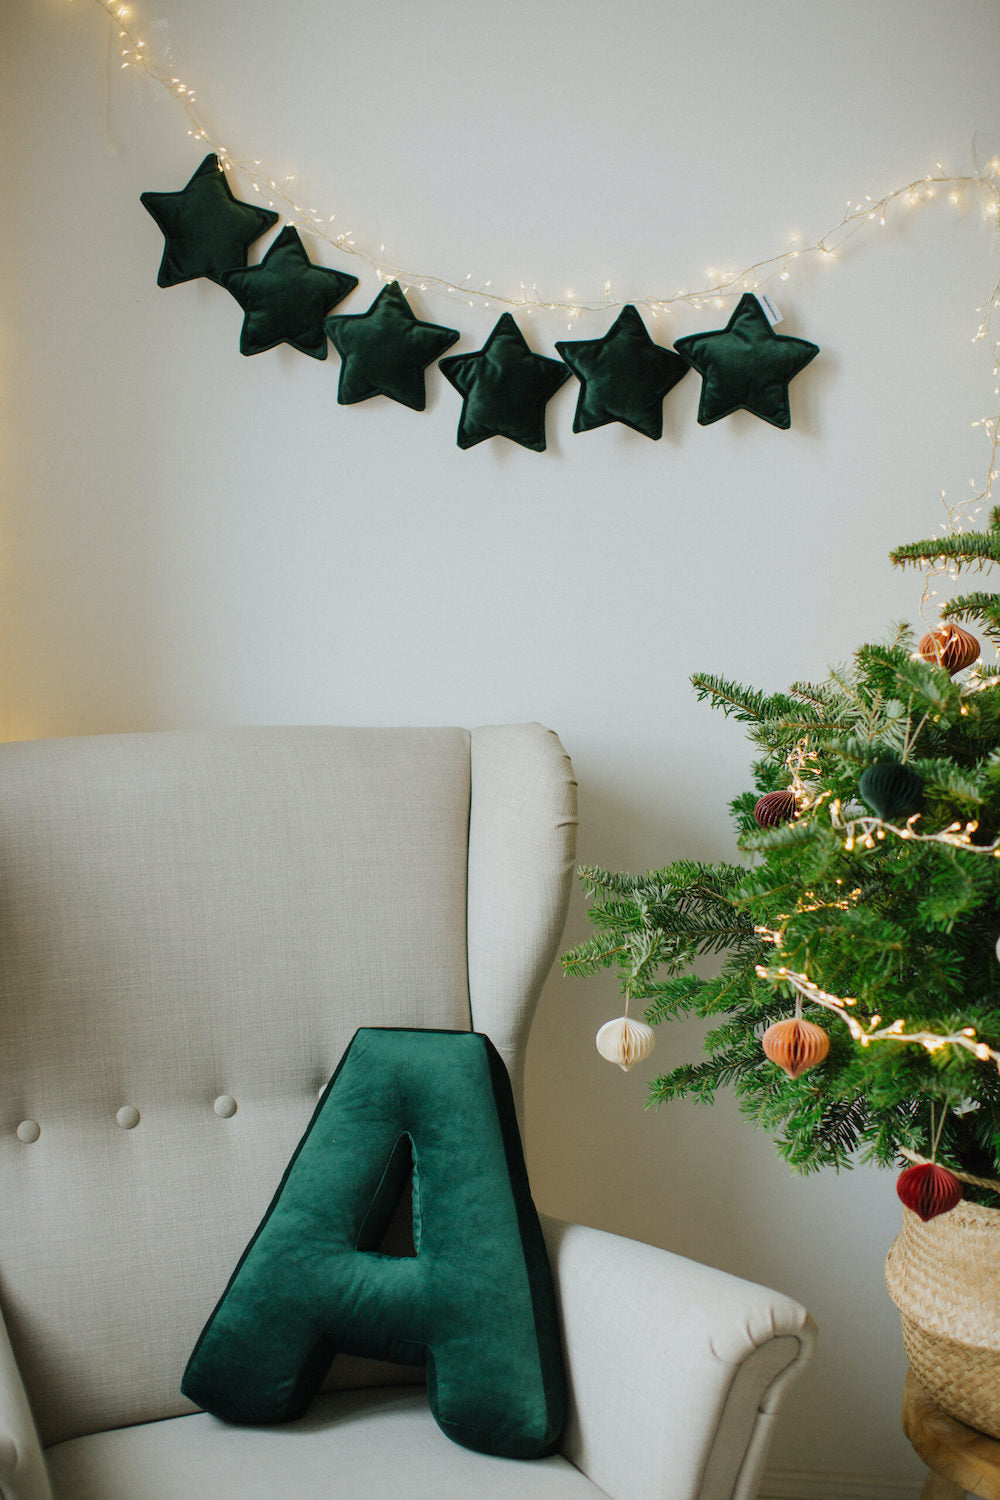 velvet star garland green by bettys home over armchair with velvet letter cushion  A green by bettys home 